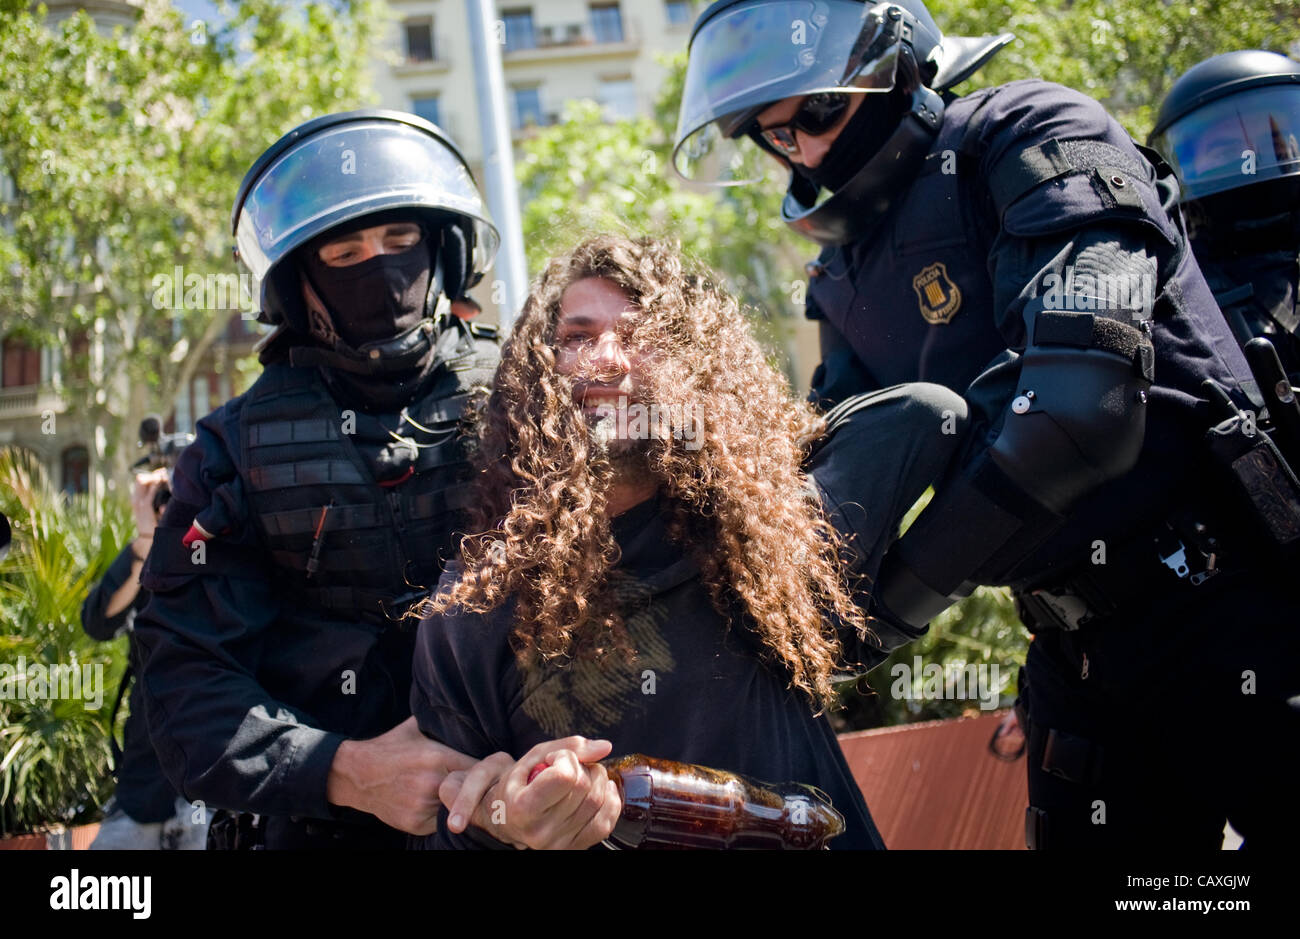 03 may, 20120-Barcelona, Spain. A man is detained by riot police during the march organized by students protesting cuts in public education. The march coincided with the visit of the European Central Bank in Barcelona which is why the city is strongly taken by the police (Photo ©Jordi Boixareu) Stock Photo